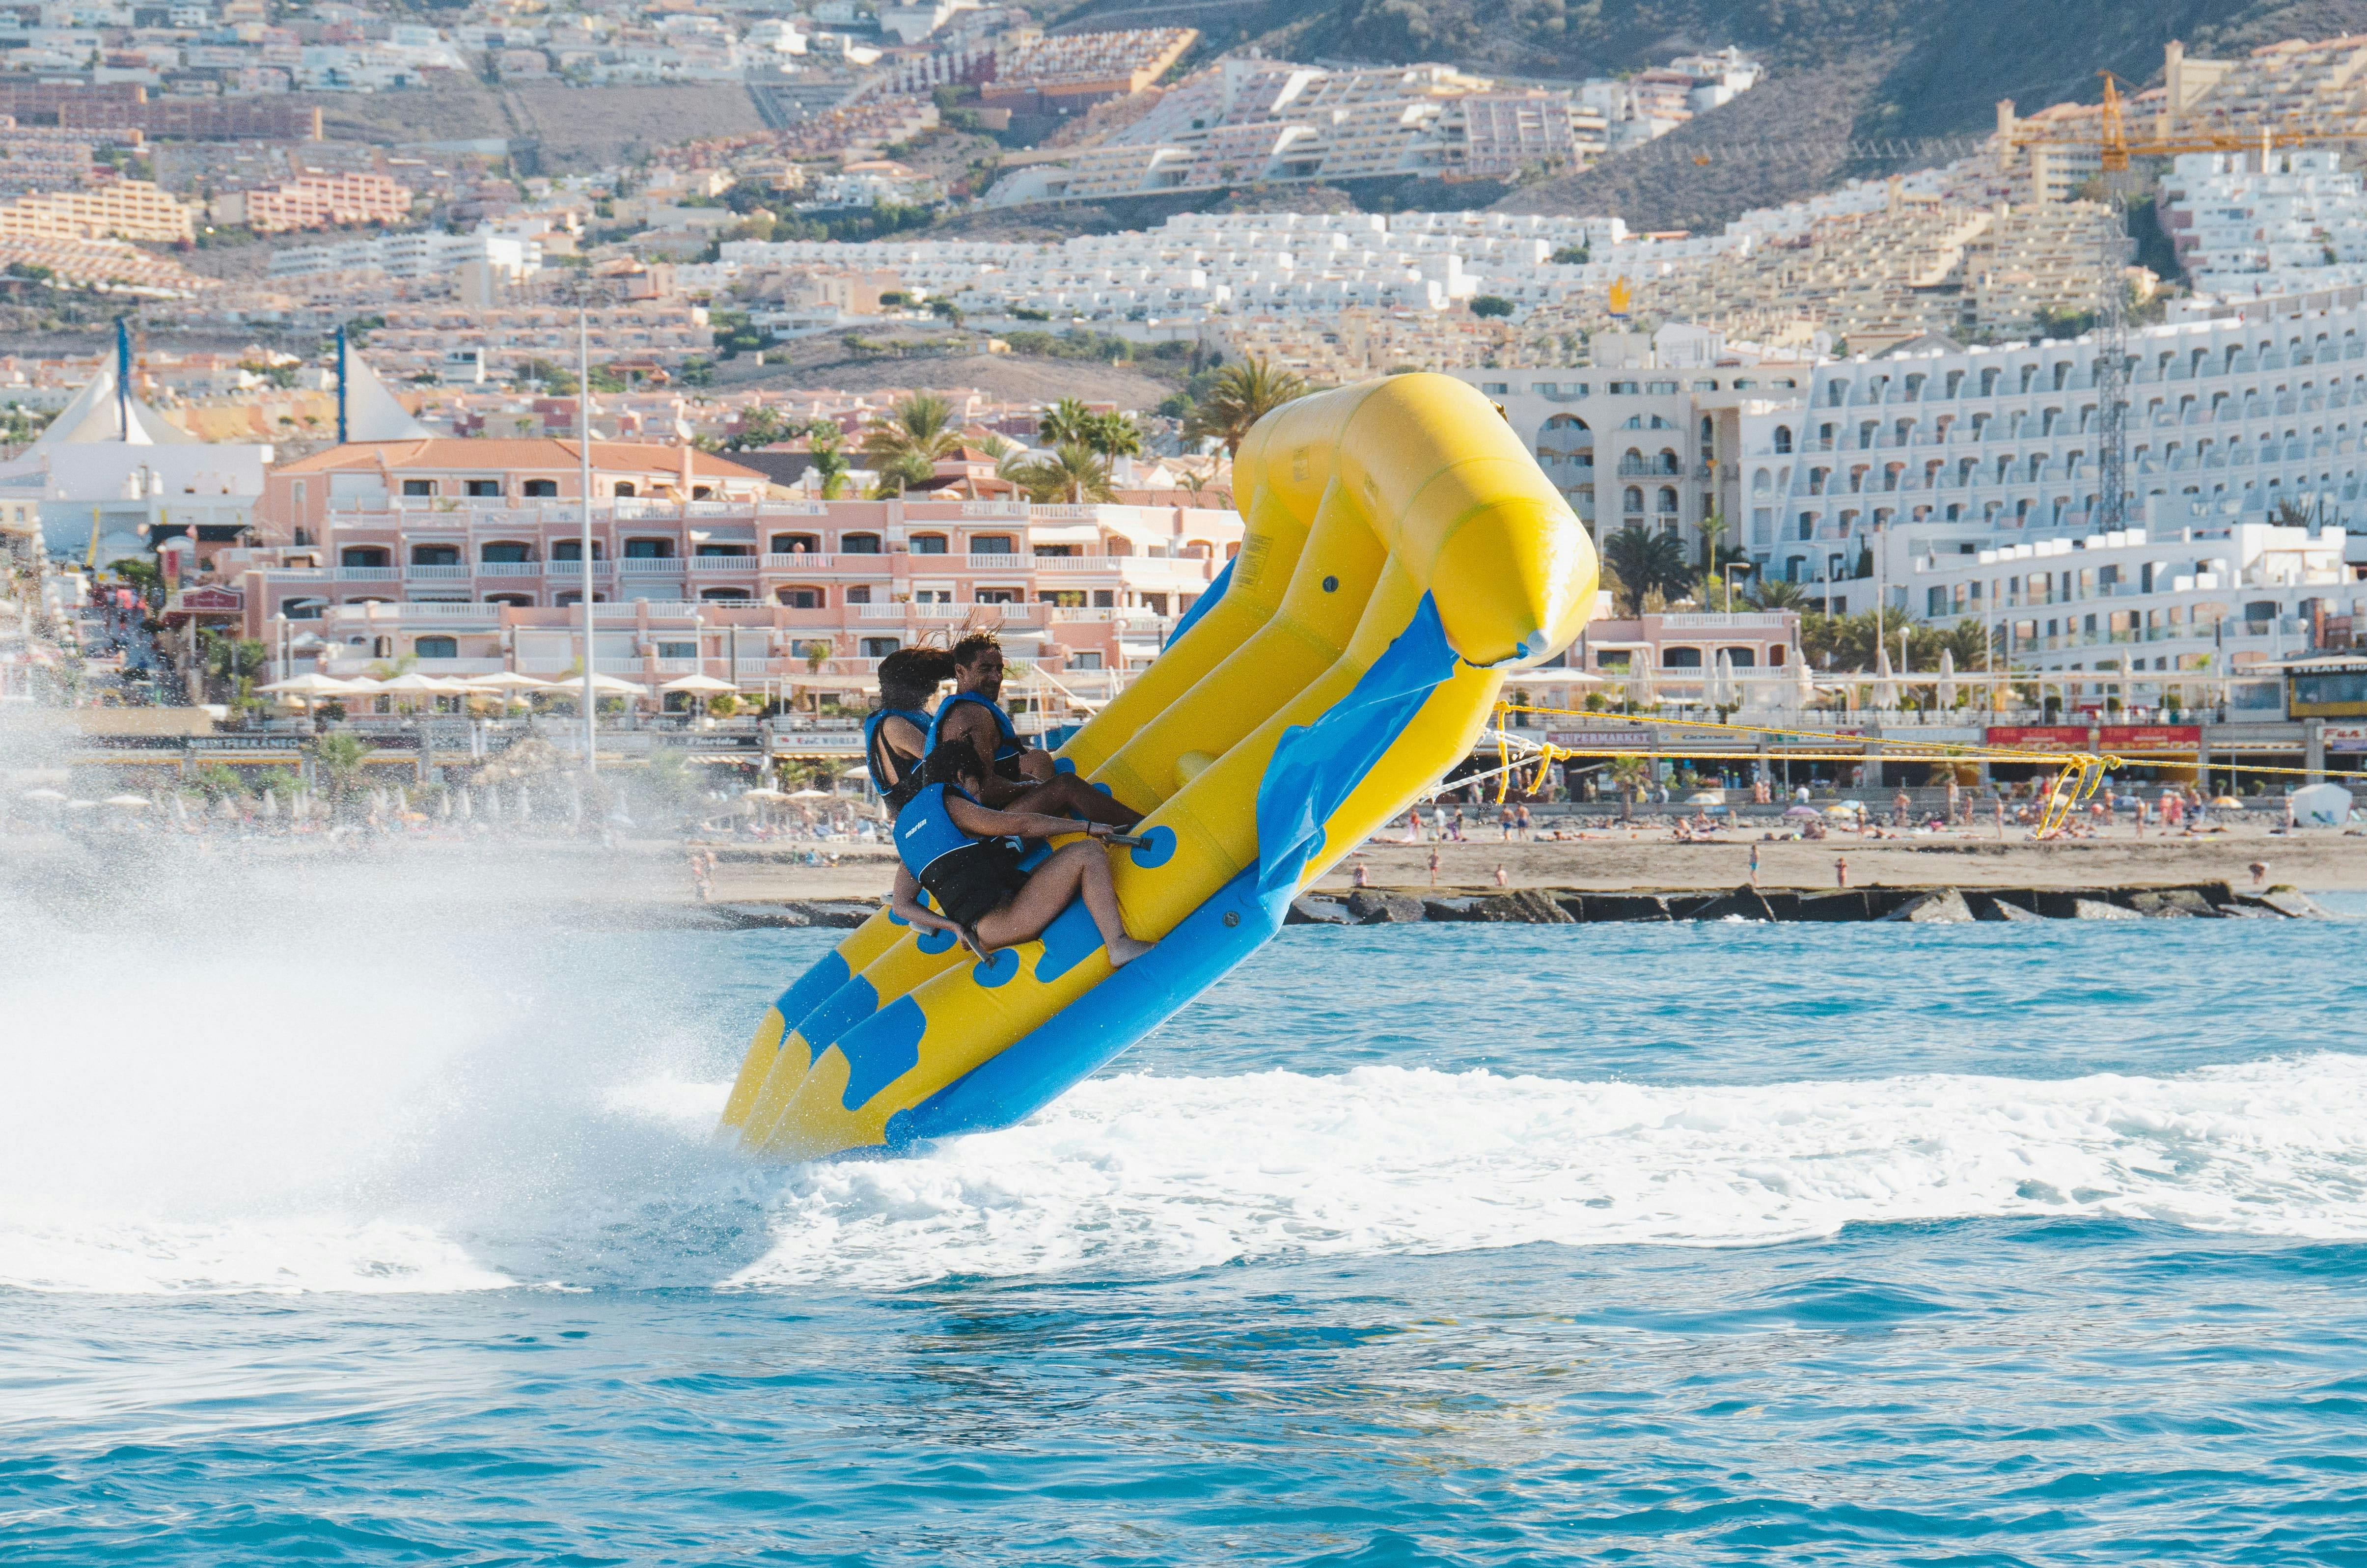 Watersports at Puerto Colon